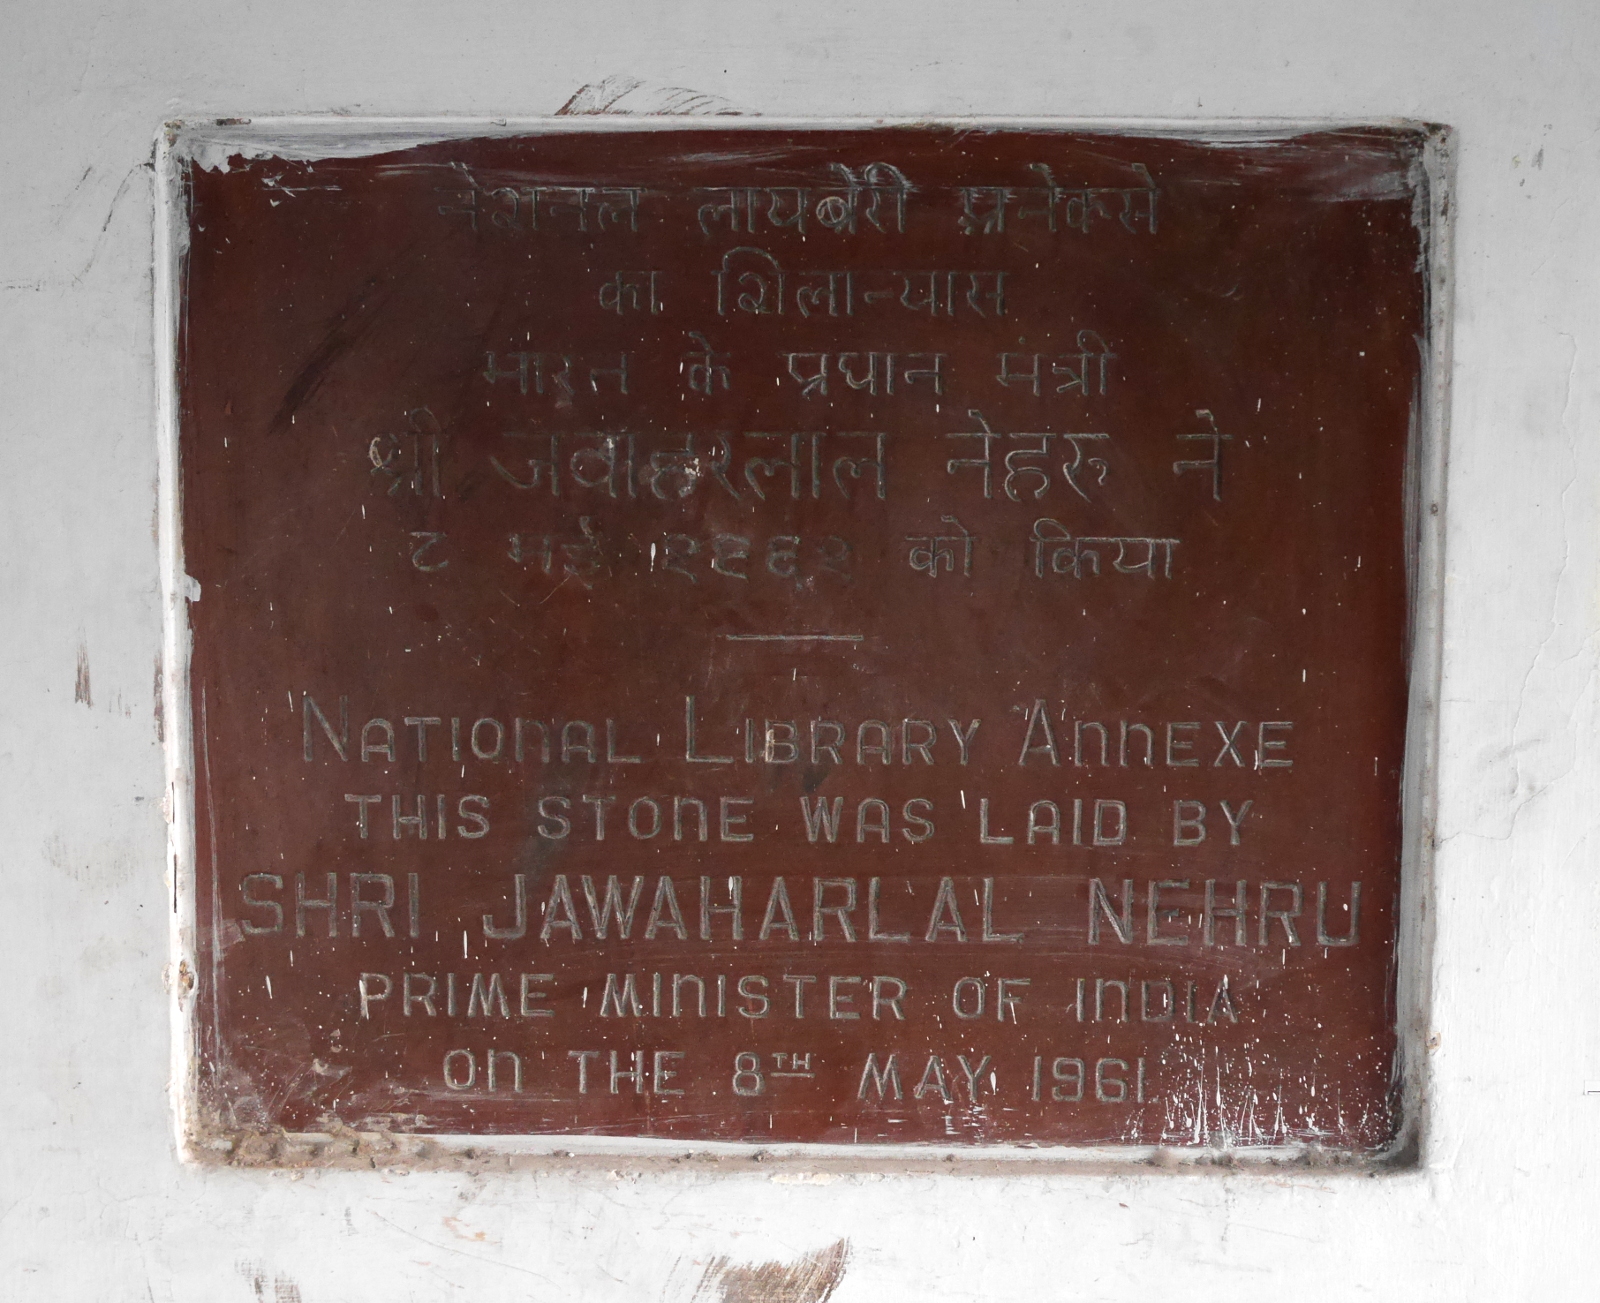 Foundation stone of the National Library Annexe.